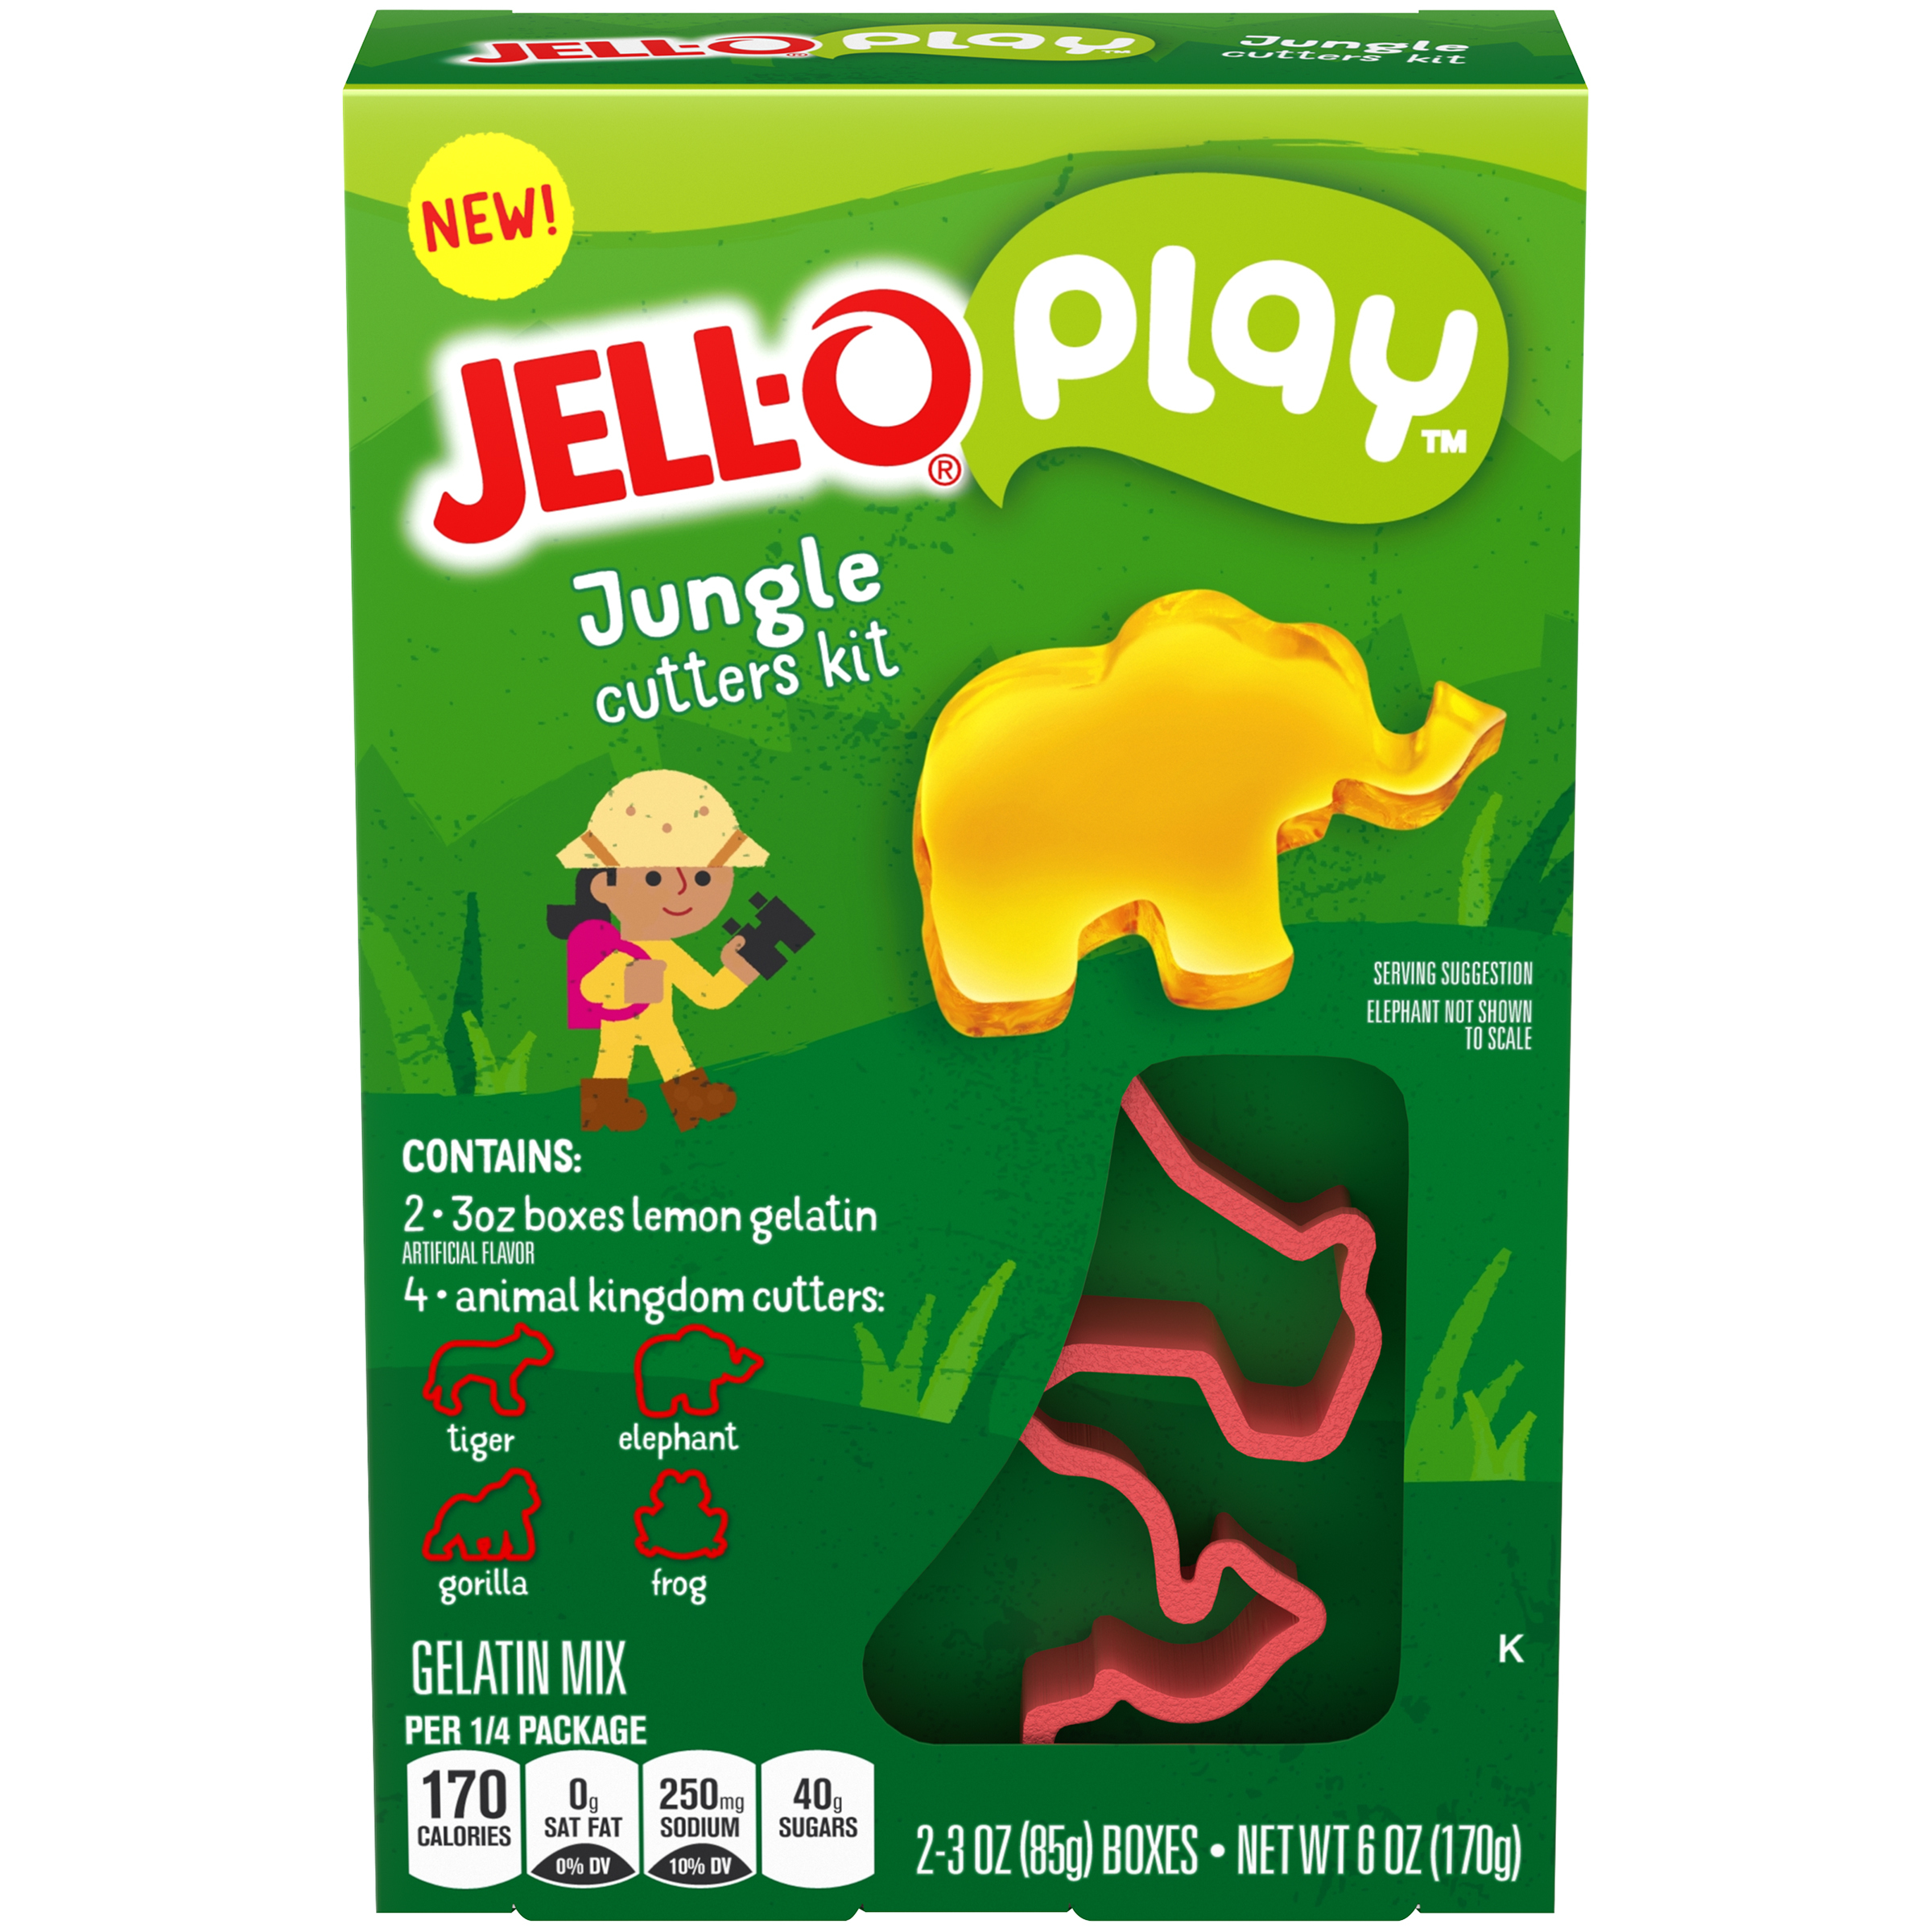 Yes, You Can Play with Your Food! After 121 Years, JELL-O is Now a Toy |  Business Wire